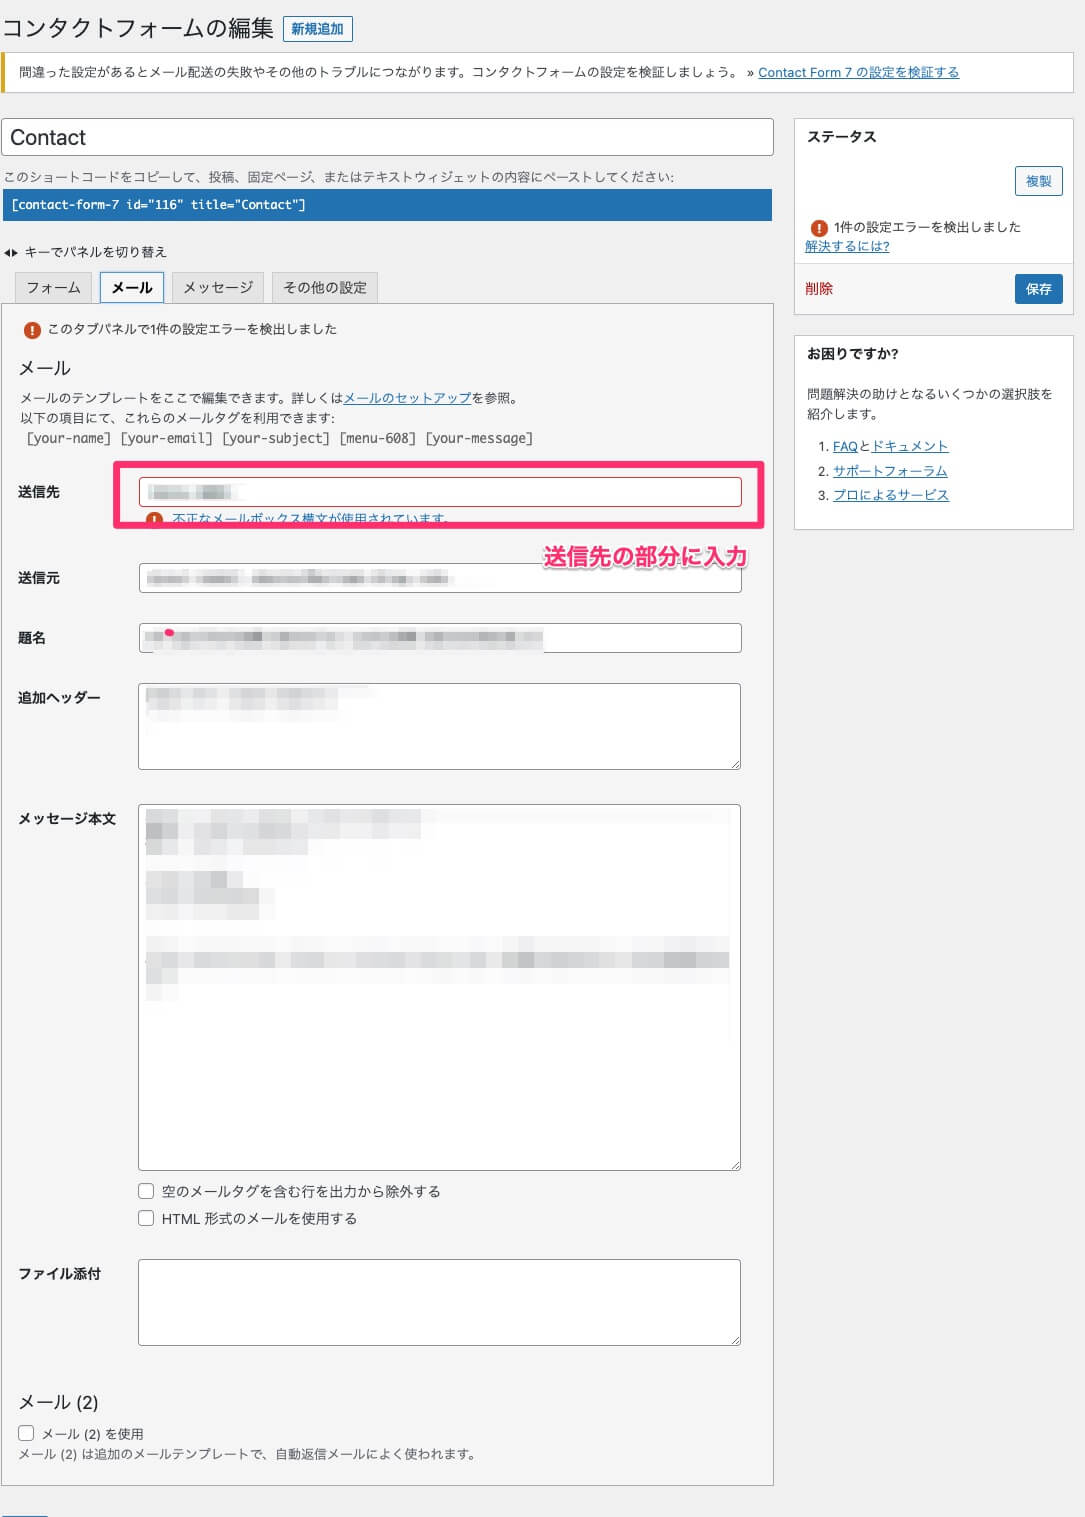 Contact Form7の管理画面のメールタブ